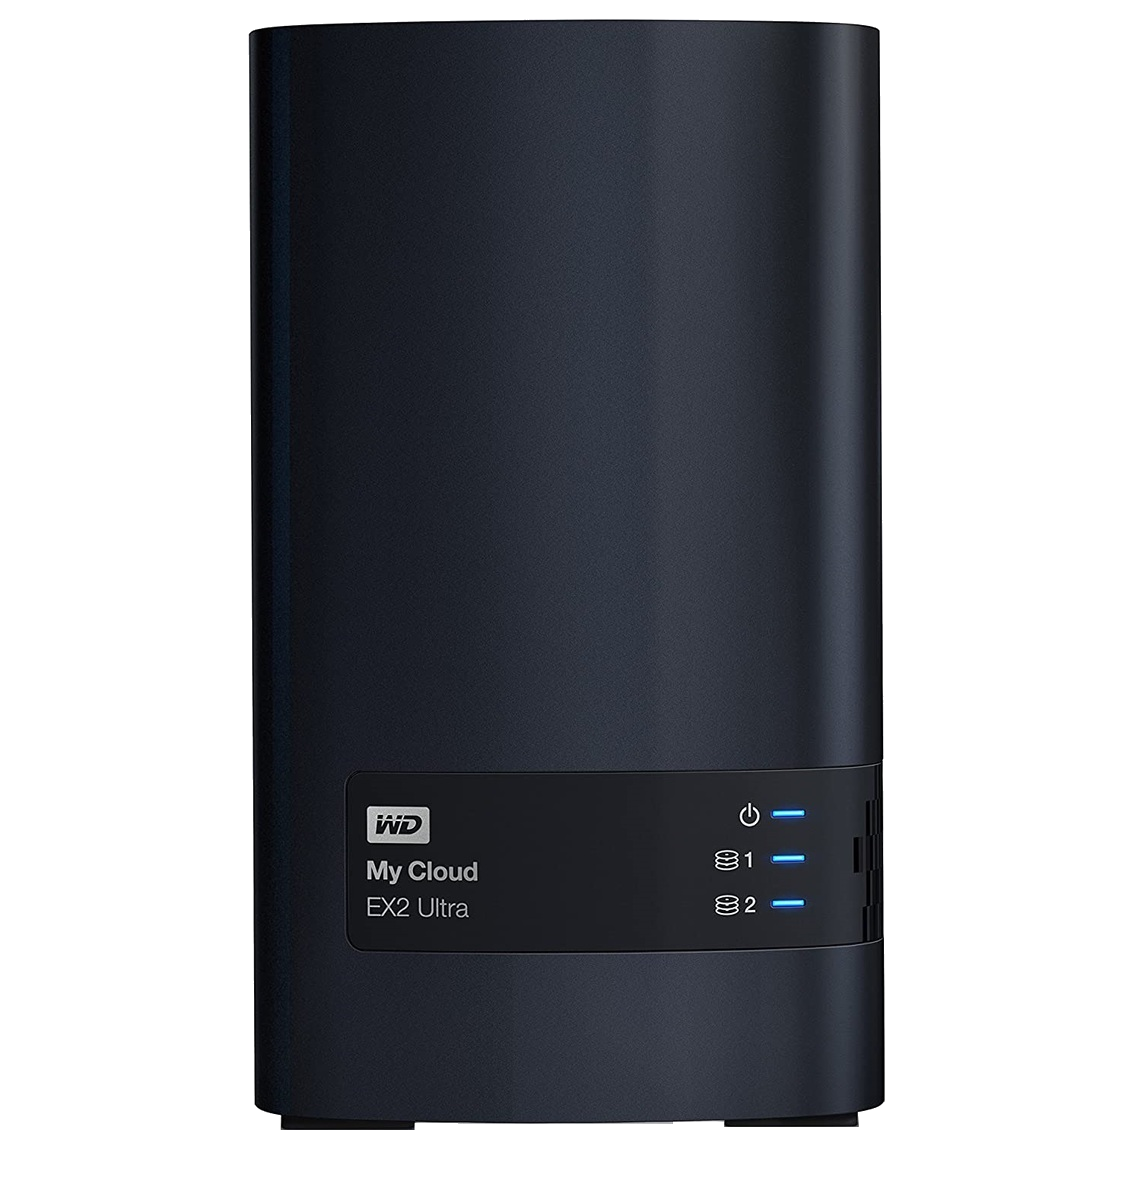 Image of the WD 4TB My Cloud EX2 Ultra Network Attached Storage in black